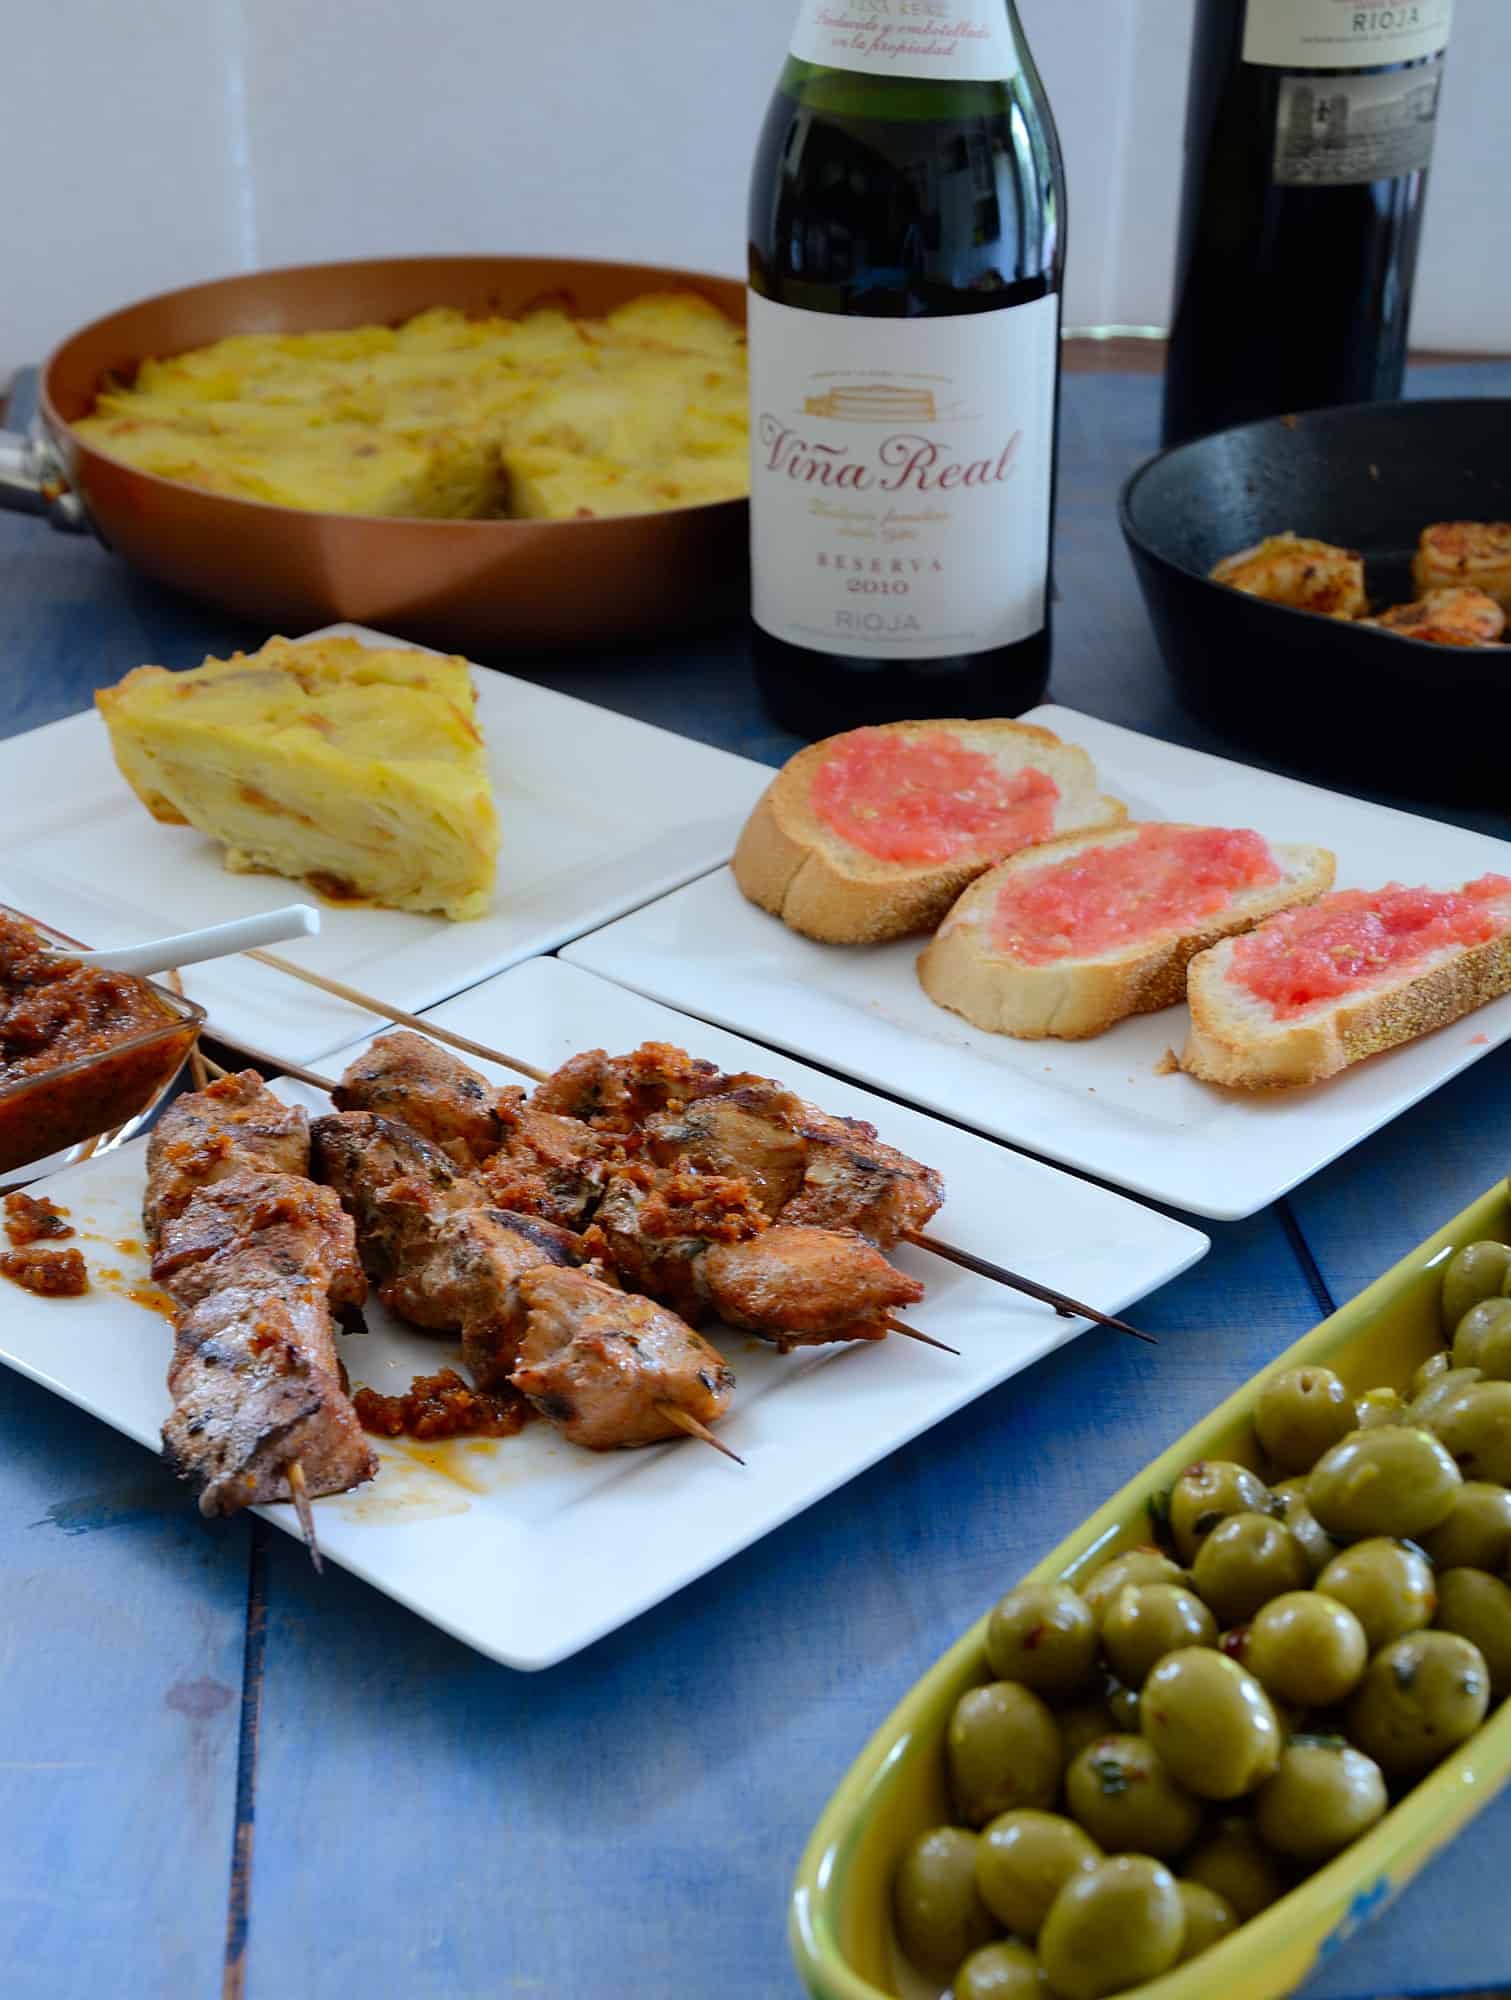 Everything You Need to Host a Tapas and Rioja Wine Tasting